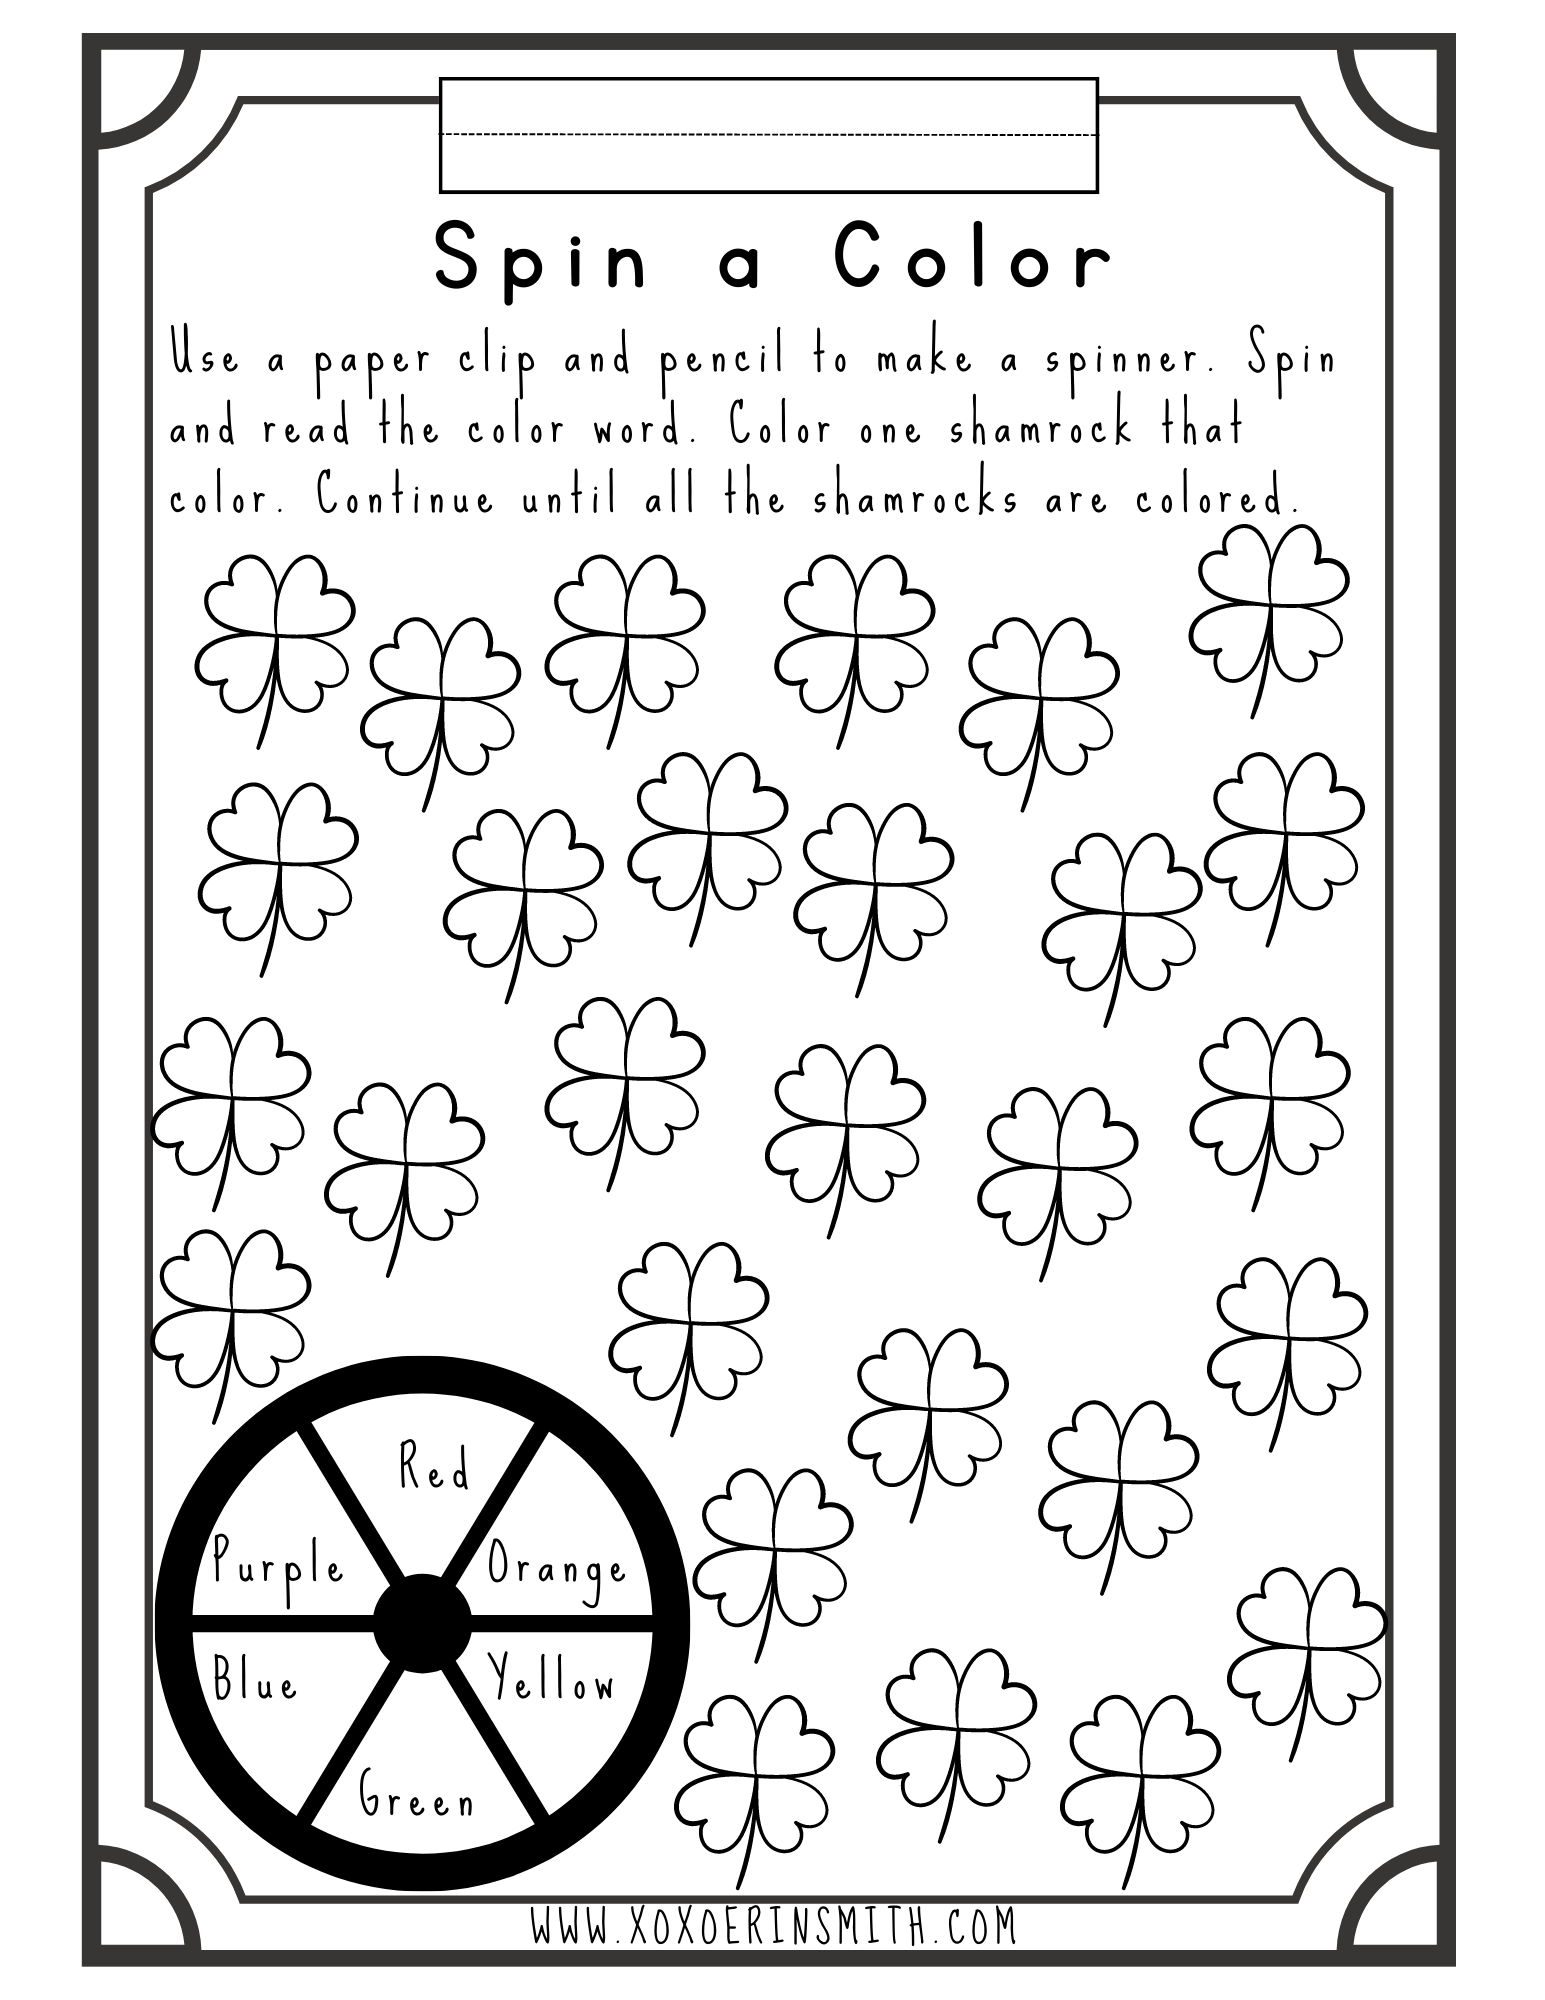 St. Patrick's Day Activities Color By Number Word Worksheets Dab a Dot